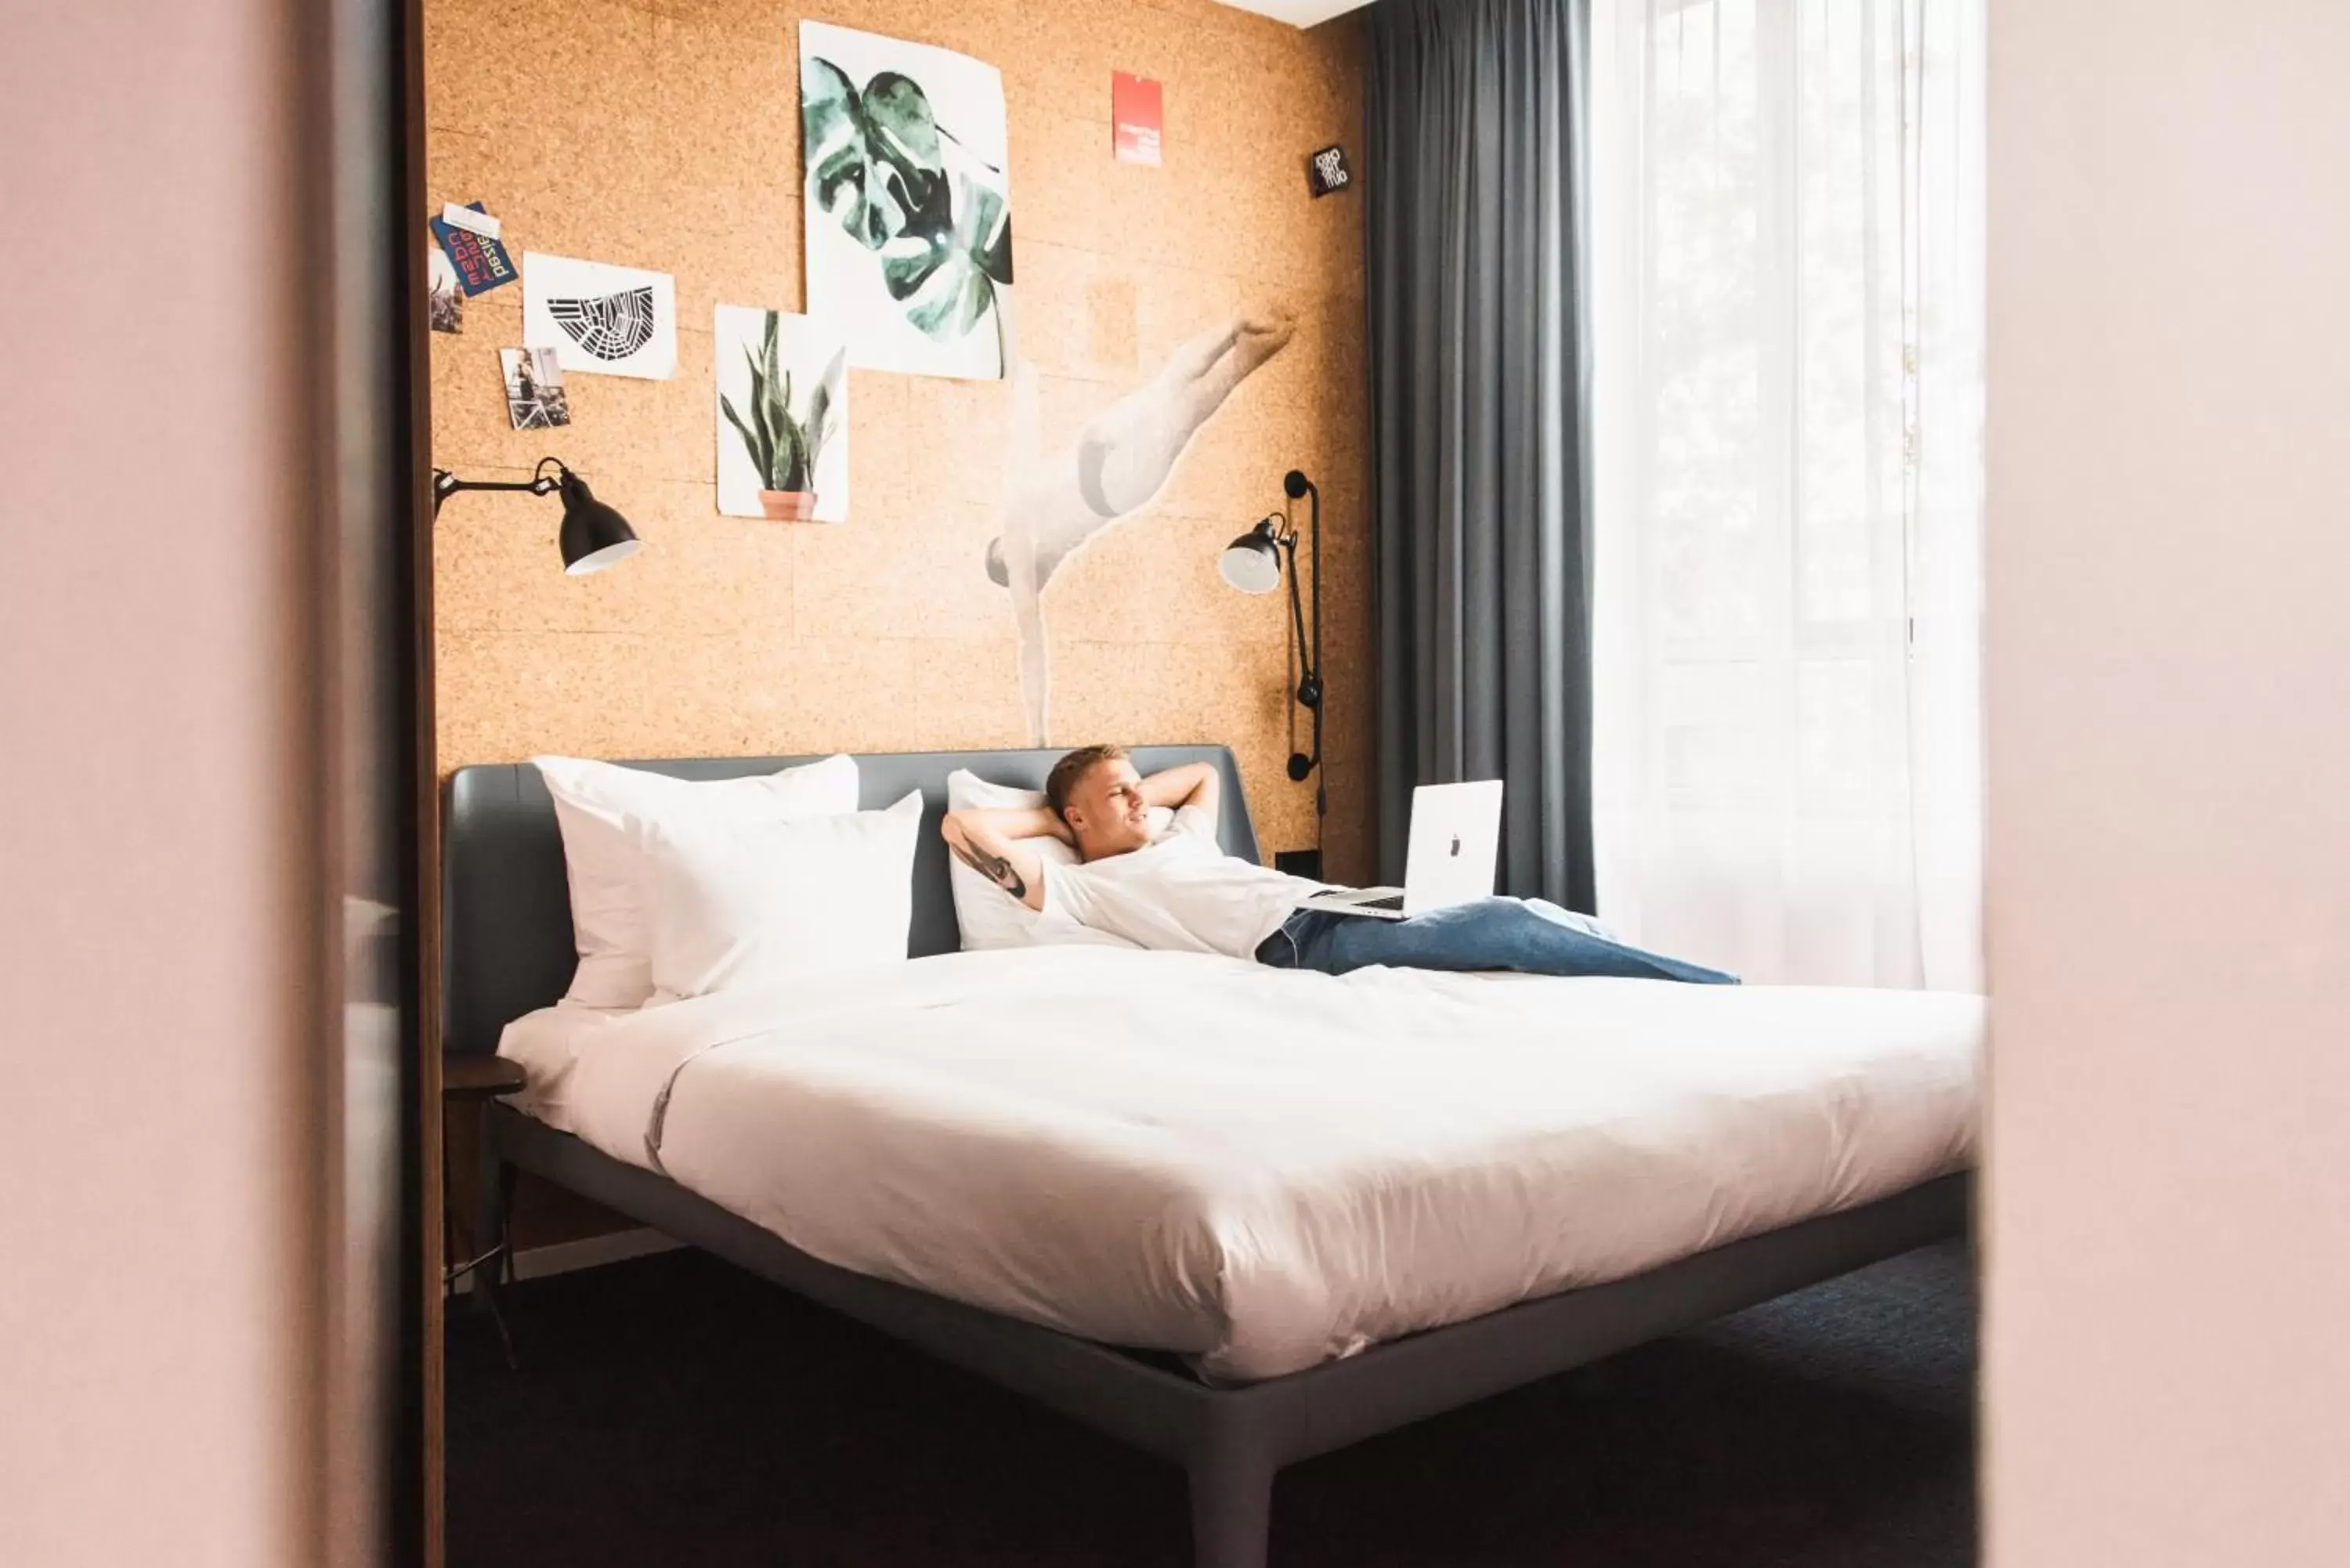 Bed in Conscious Hotel Amsterdam City - The Tire Station